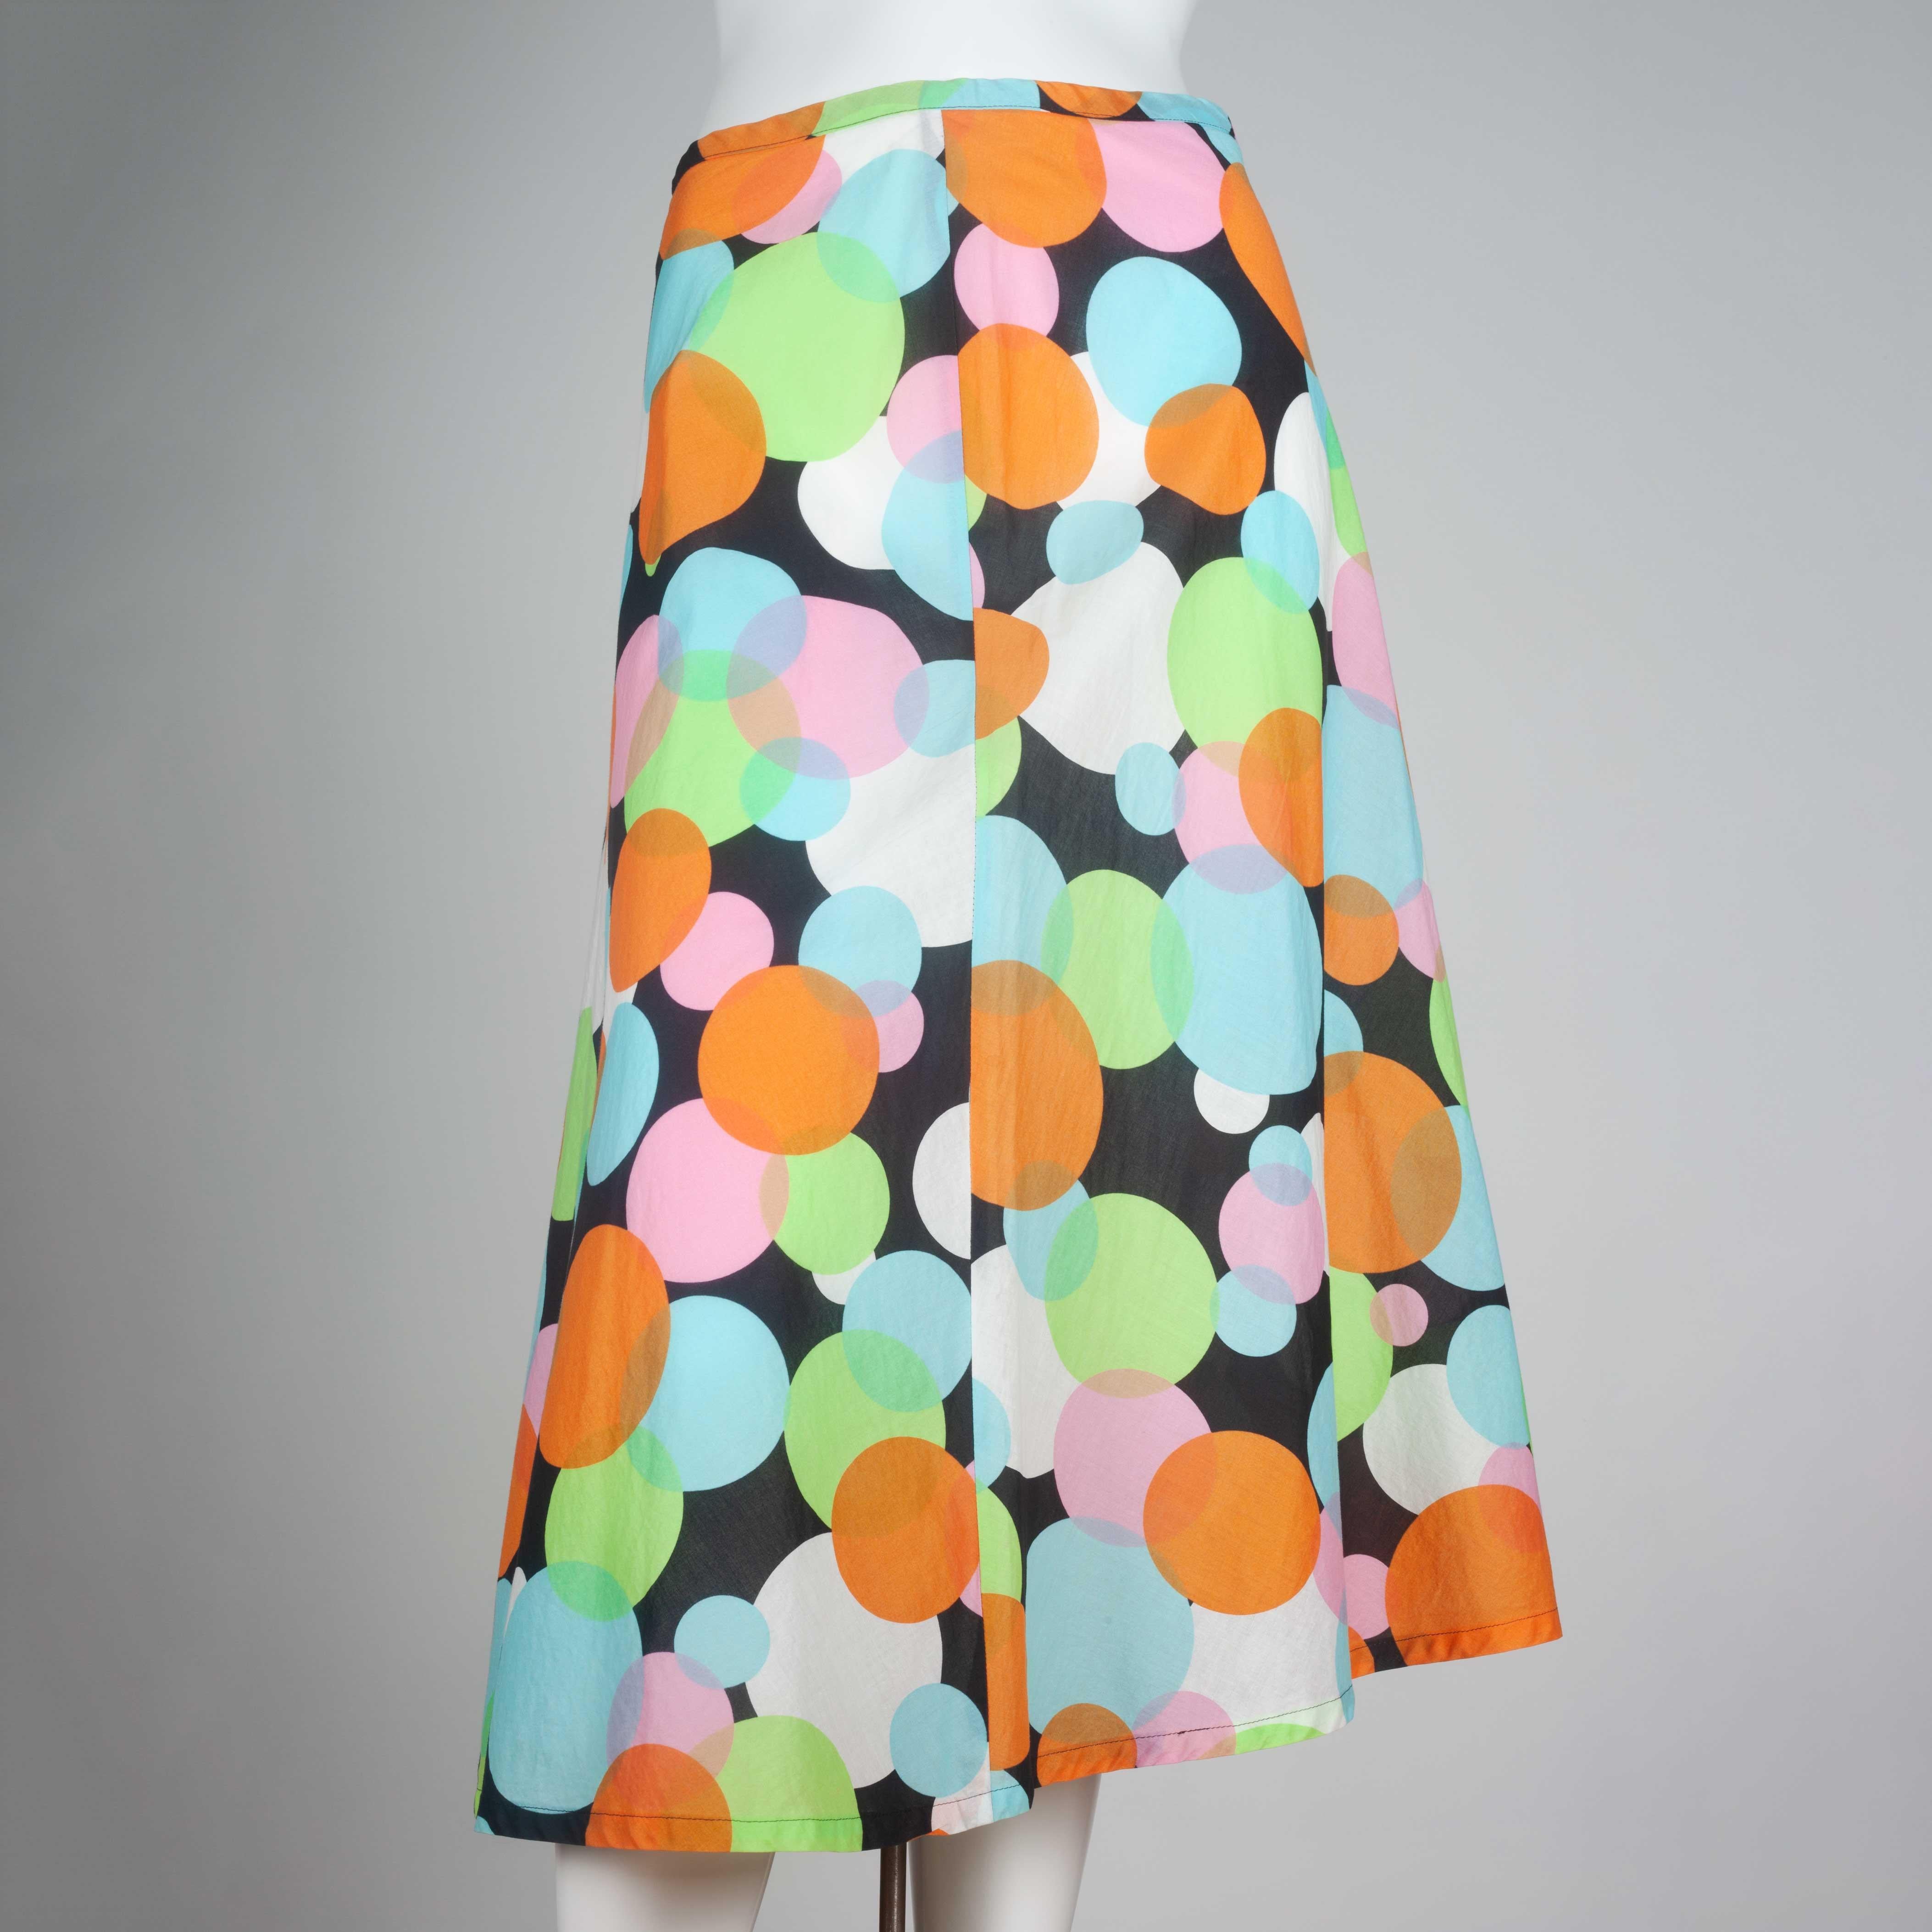 Comme des Garçons 2003 archive, a cotton skirt from Japan with large dots in orange, blue, green, pink and white on a black background. Delicate, thin cotton material. Yayoi Kusama feels.

YEAR: 2003
MARKED SIZE: No size marked
US WOMEN'S: S
US